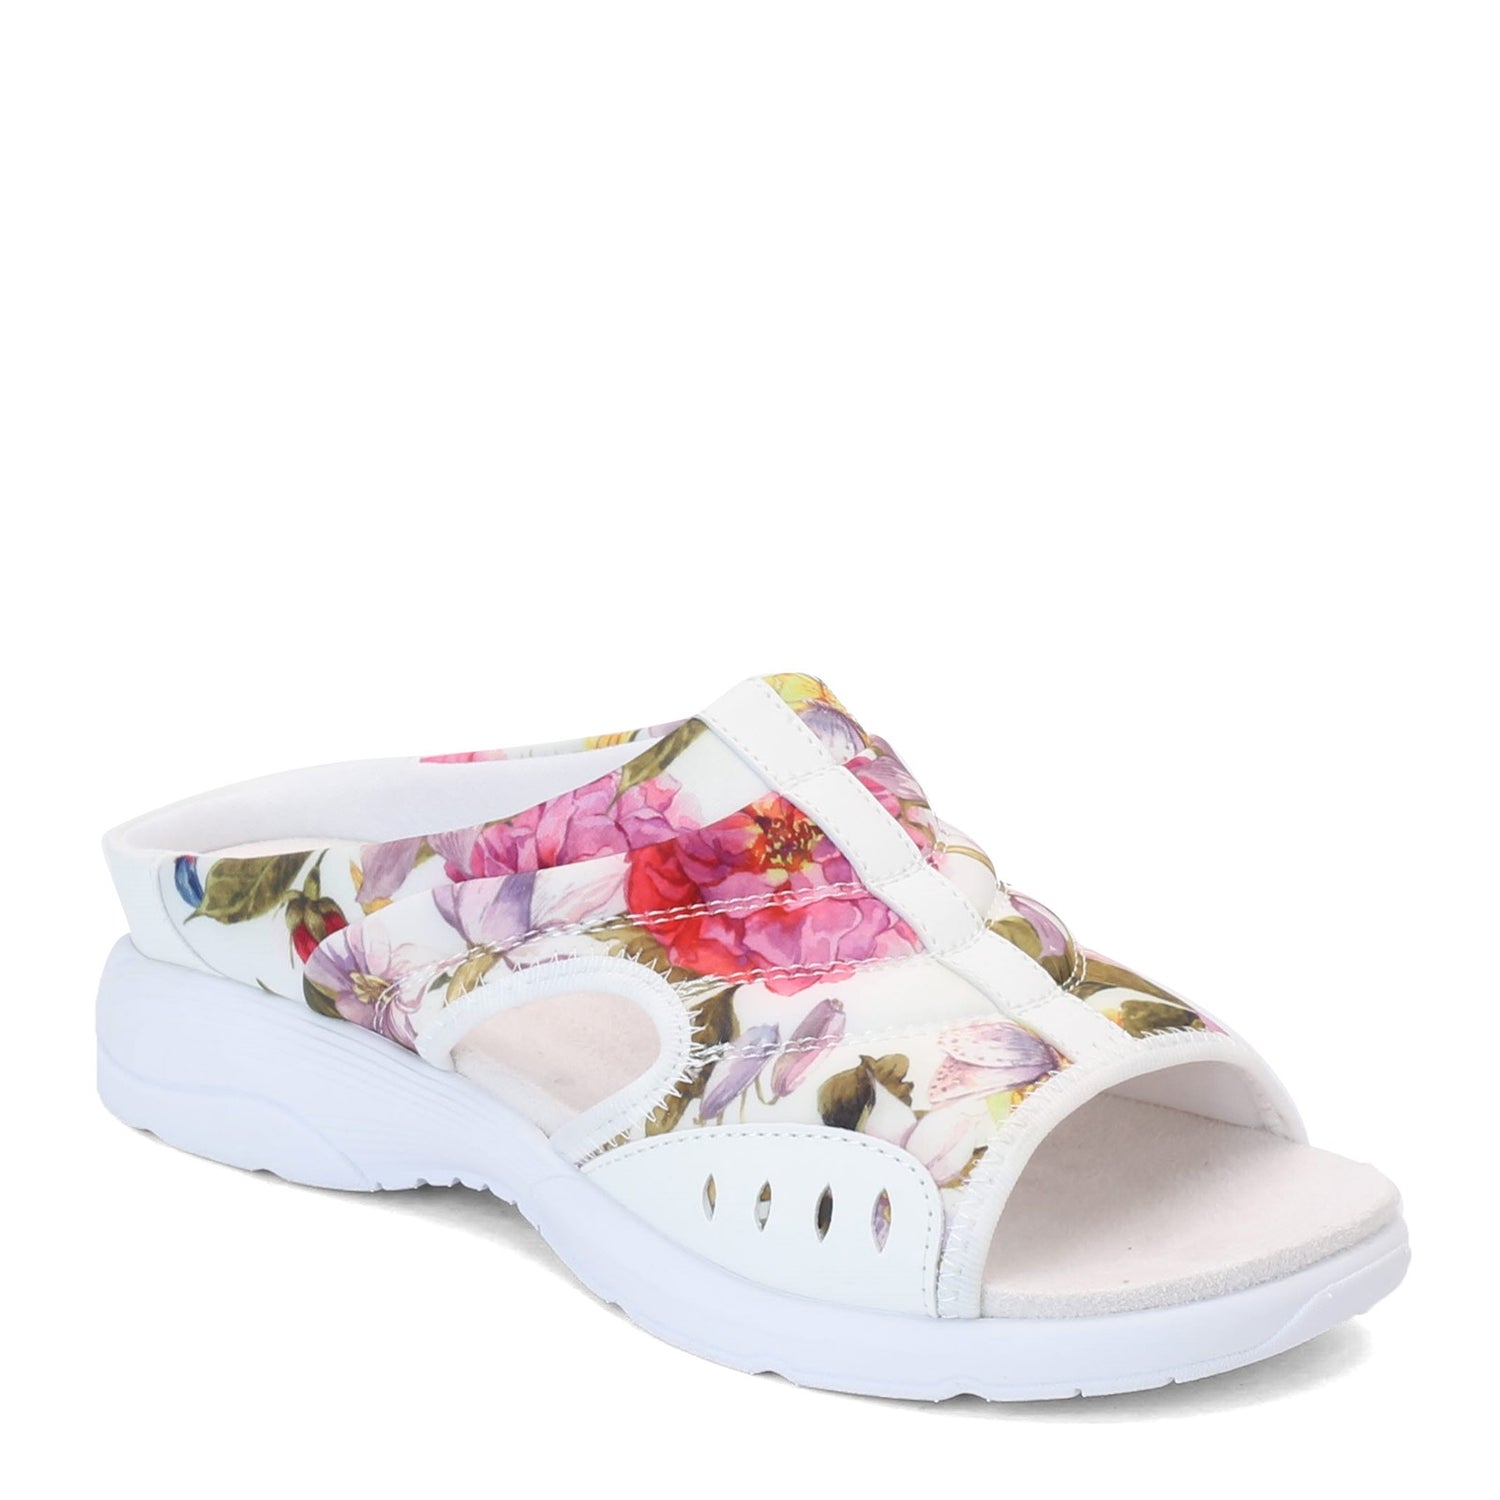 Peltz Shoes  Women's Easy Spirit Traciee Sandal WHITE FLORAL TRACIEE2-WHI07